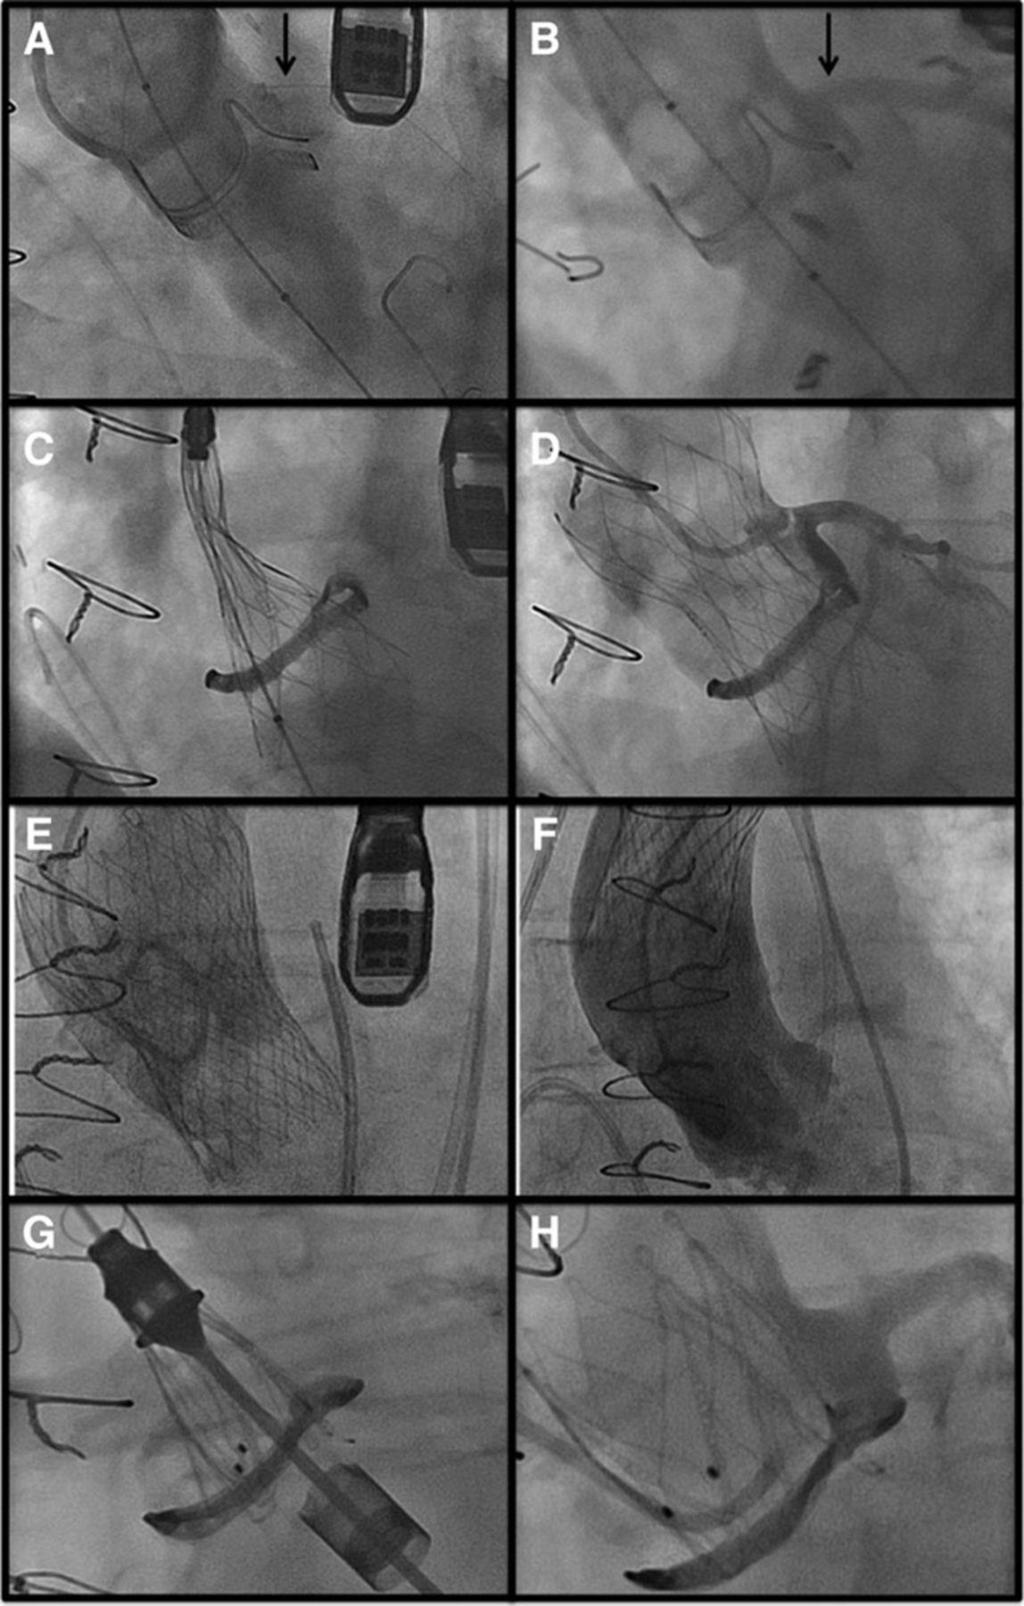 A and B, Aortic balloon inflation used for the assessment of coronary occlusion risk. Coronary flow obstruction, with a protective coronary guidewire in place (A) and unimpaired flow (B).